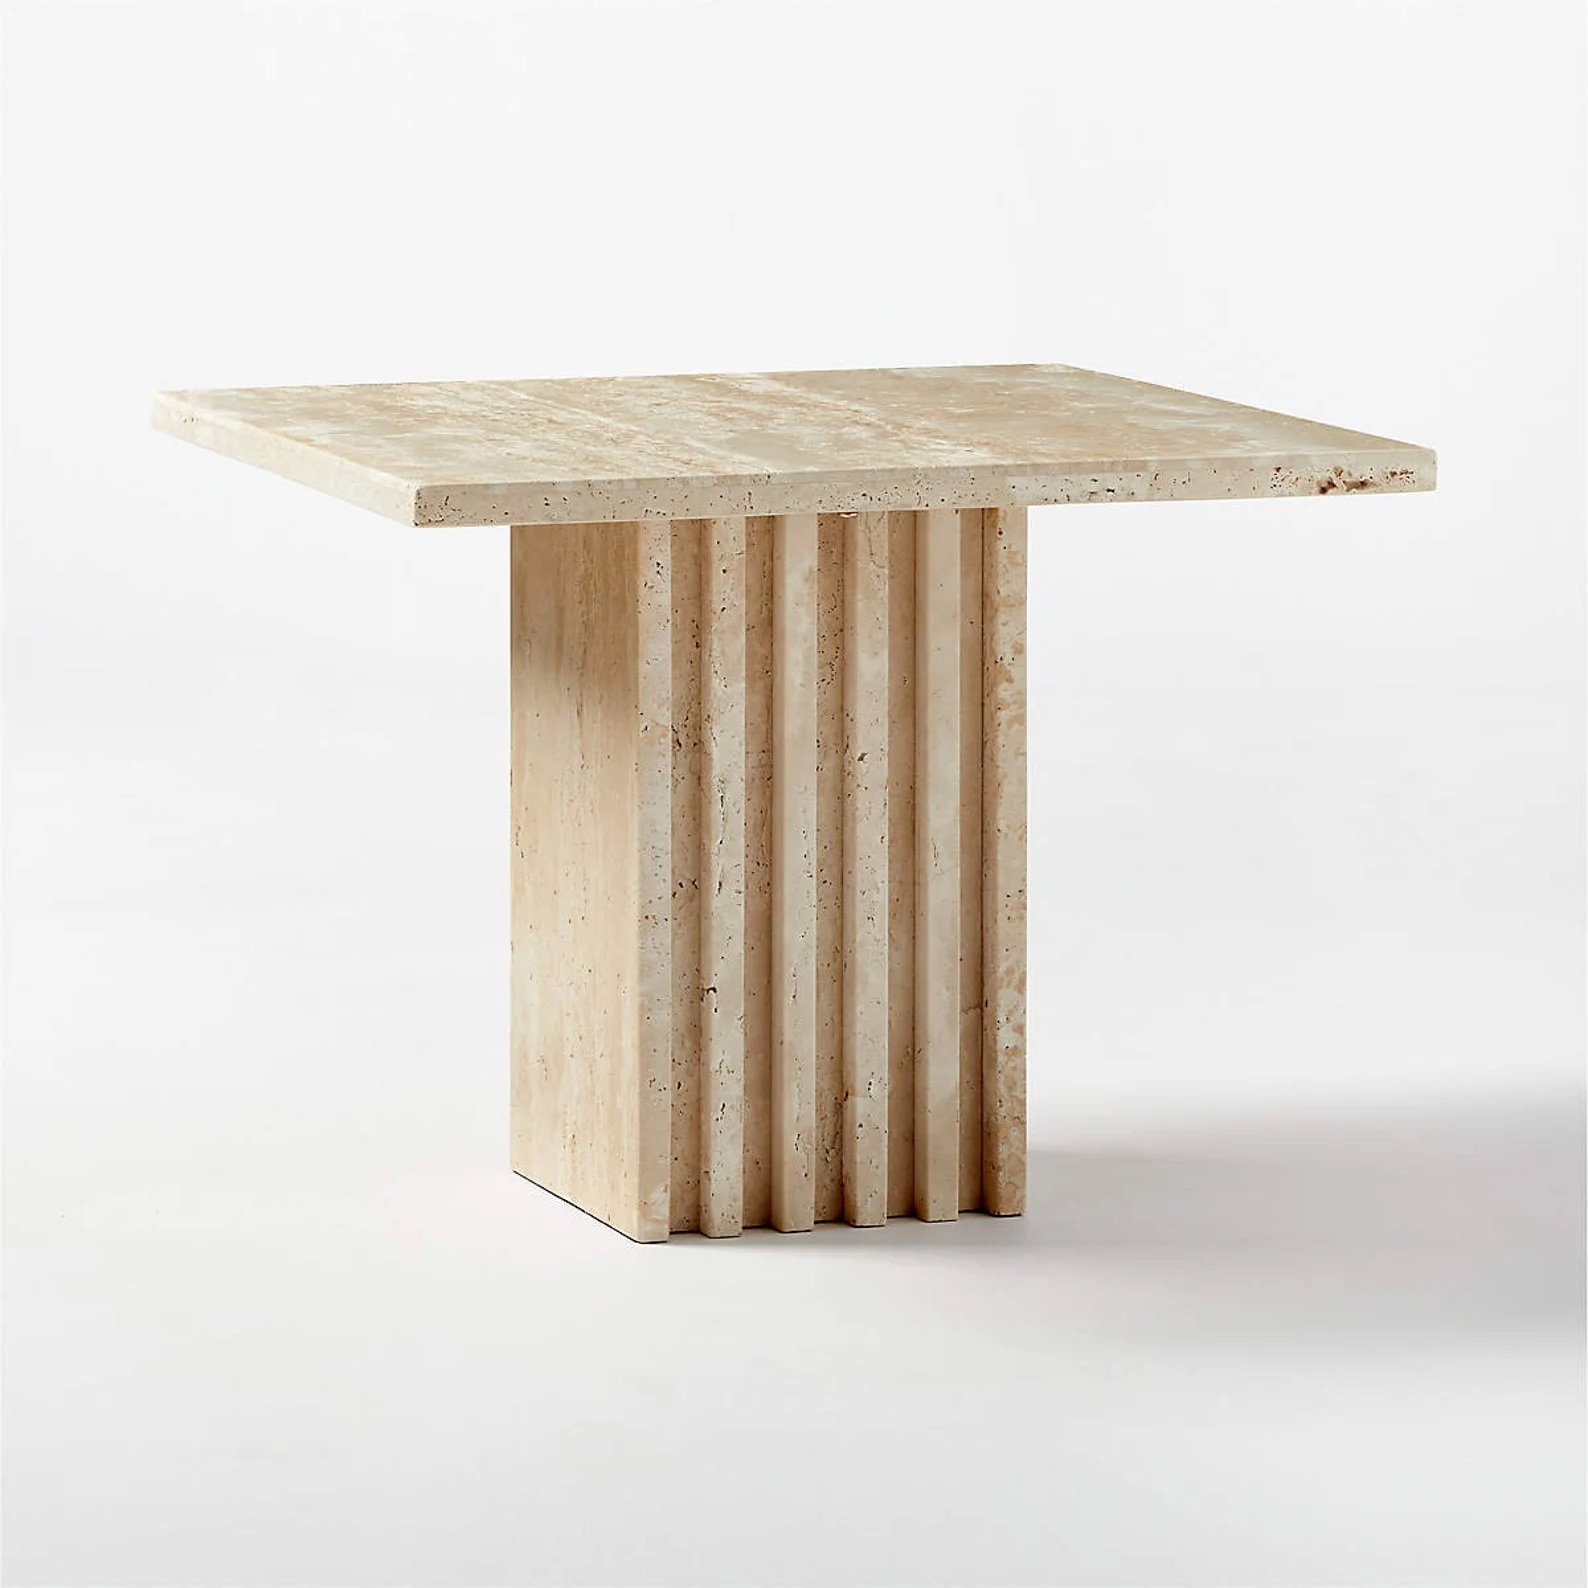 travertine-side-tables-rectangle-shaped-stone-contemporary-pedestal-table-custom-modern-designs-tables-tops-bases-luxury-home-decor